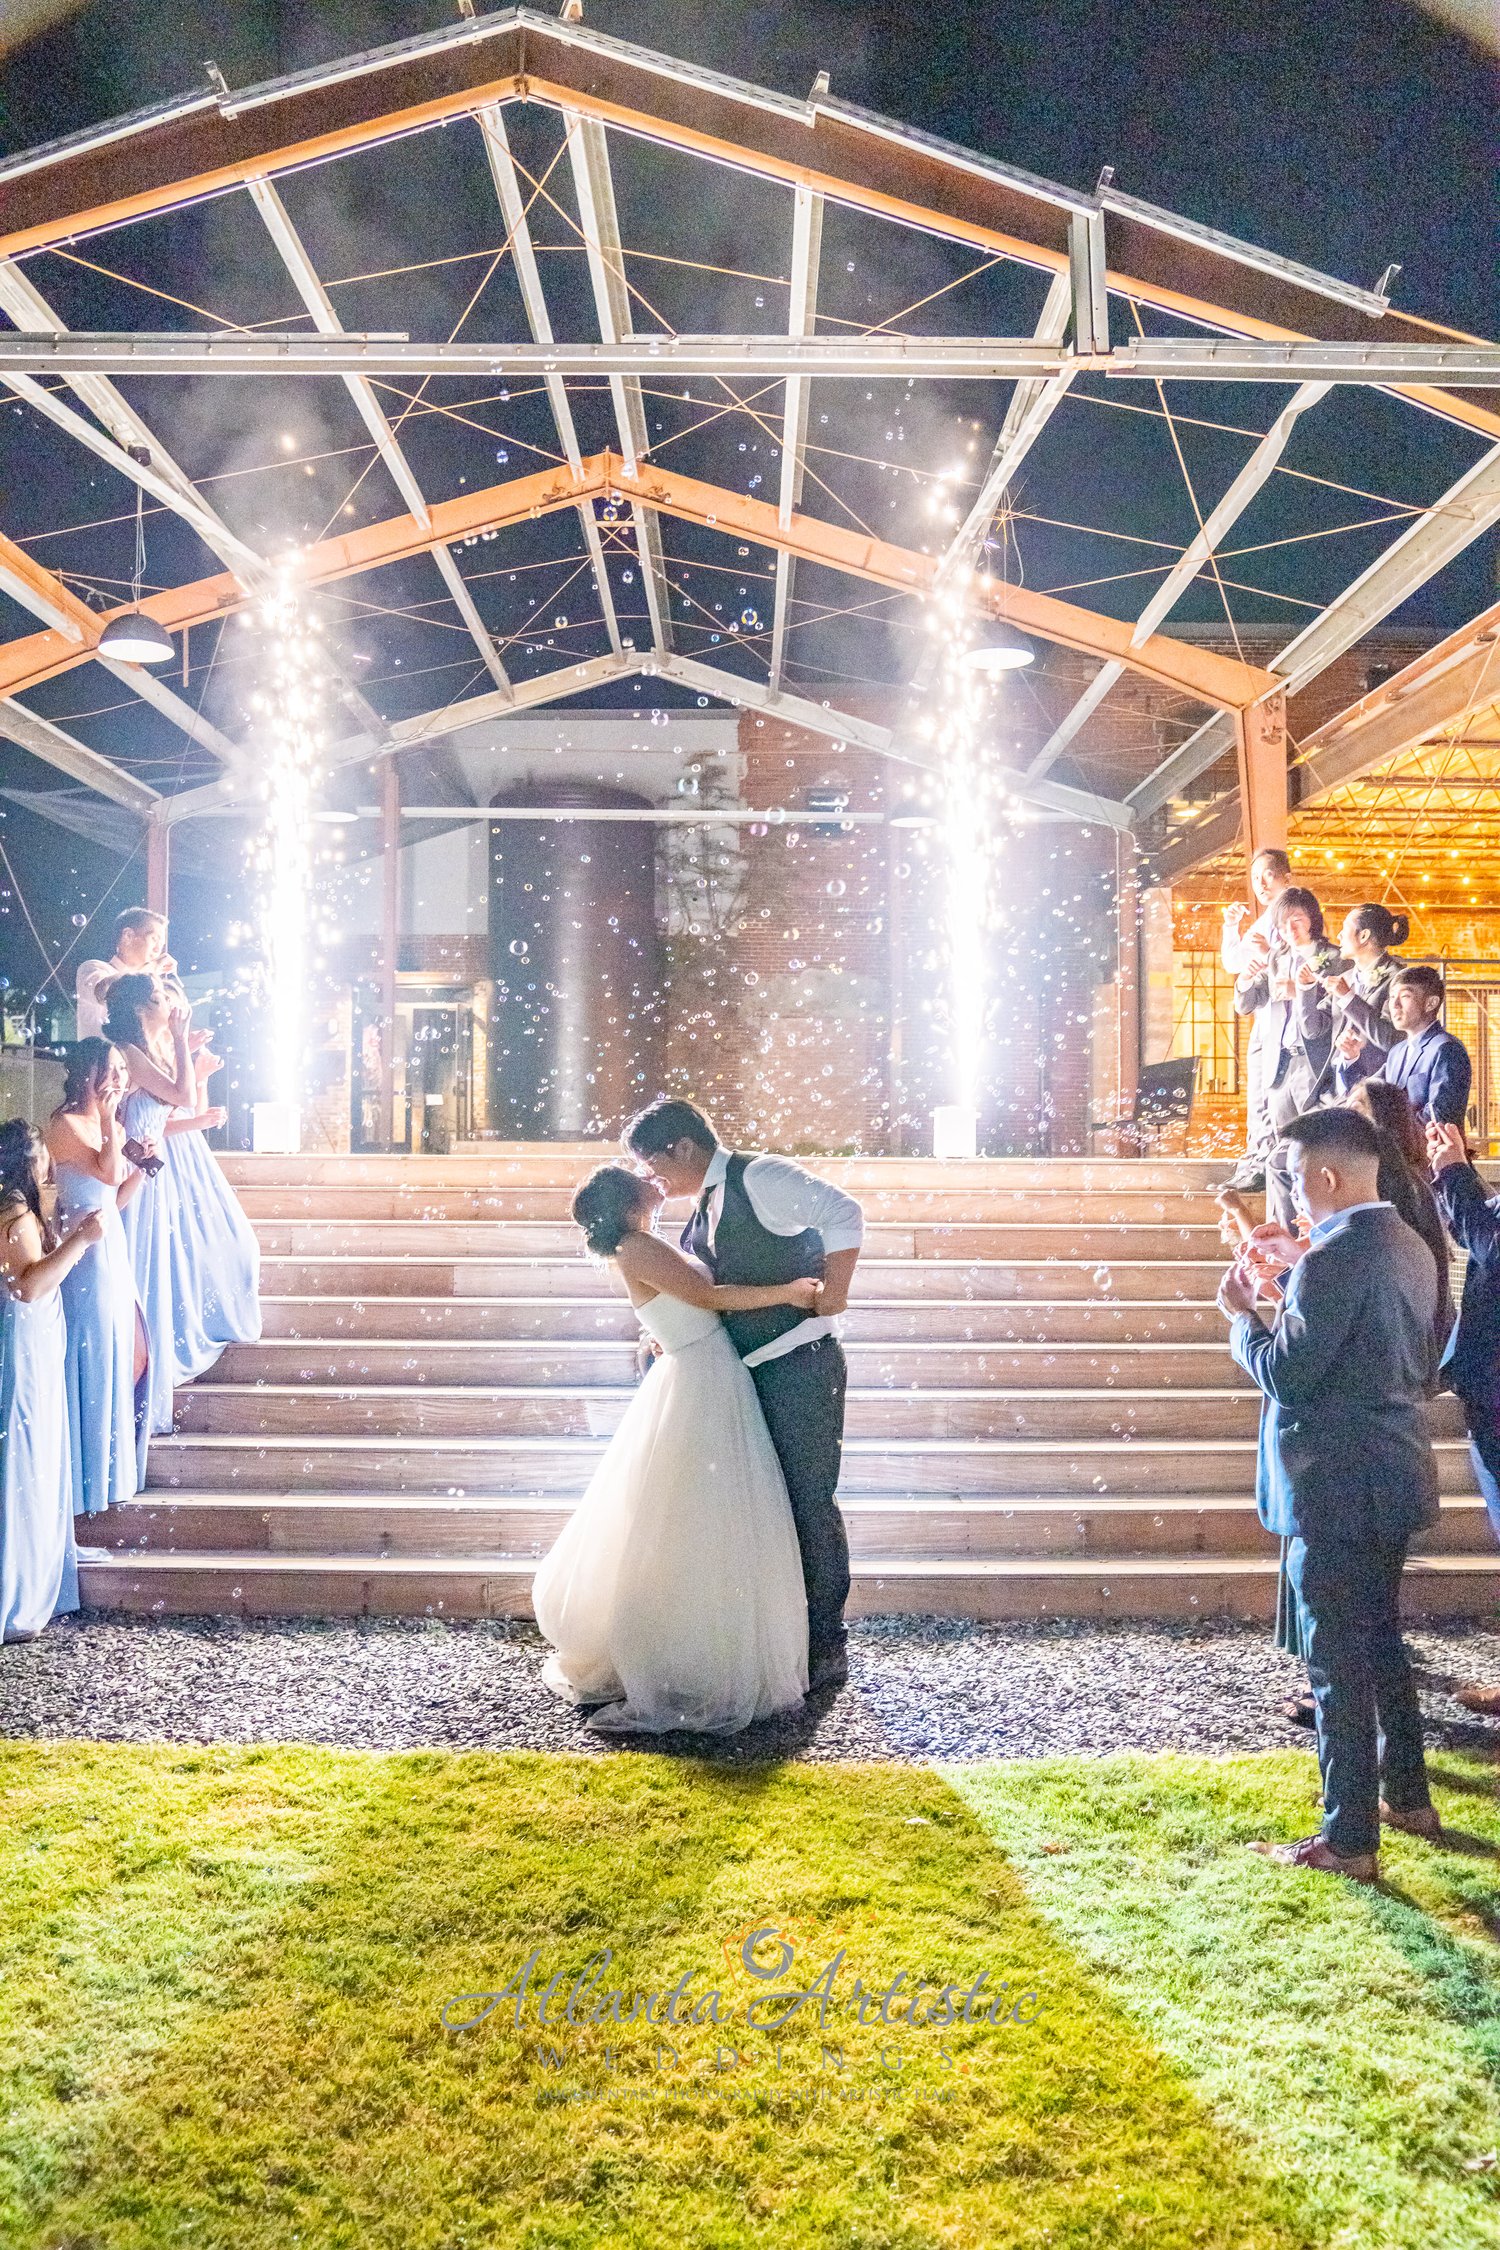 Photography by the Atlanta's Best Wedding Photographers at AtlantaArtisticWeddings capture the Candid and Intimate Moments with a Photo Documentary Style by masterning lighting and Night photography